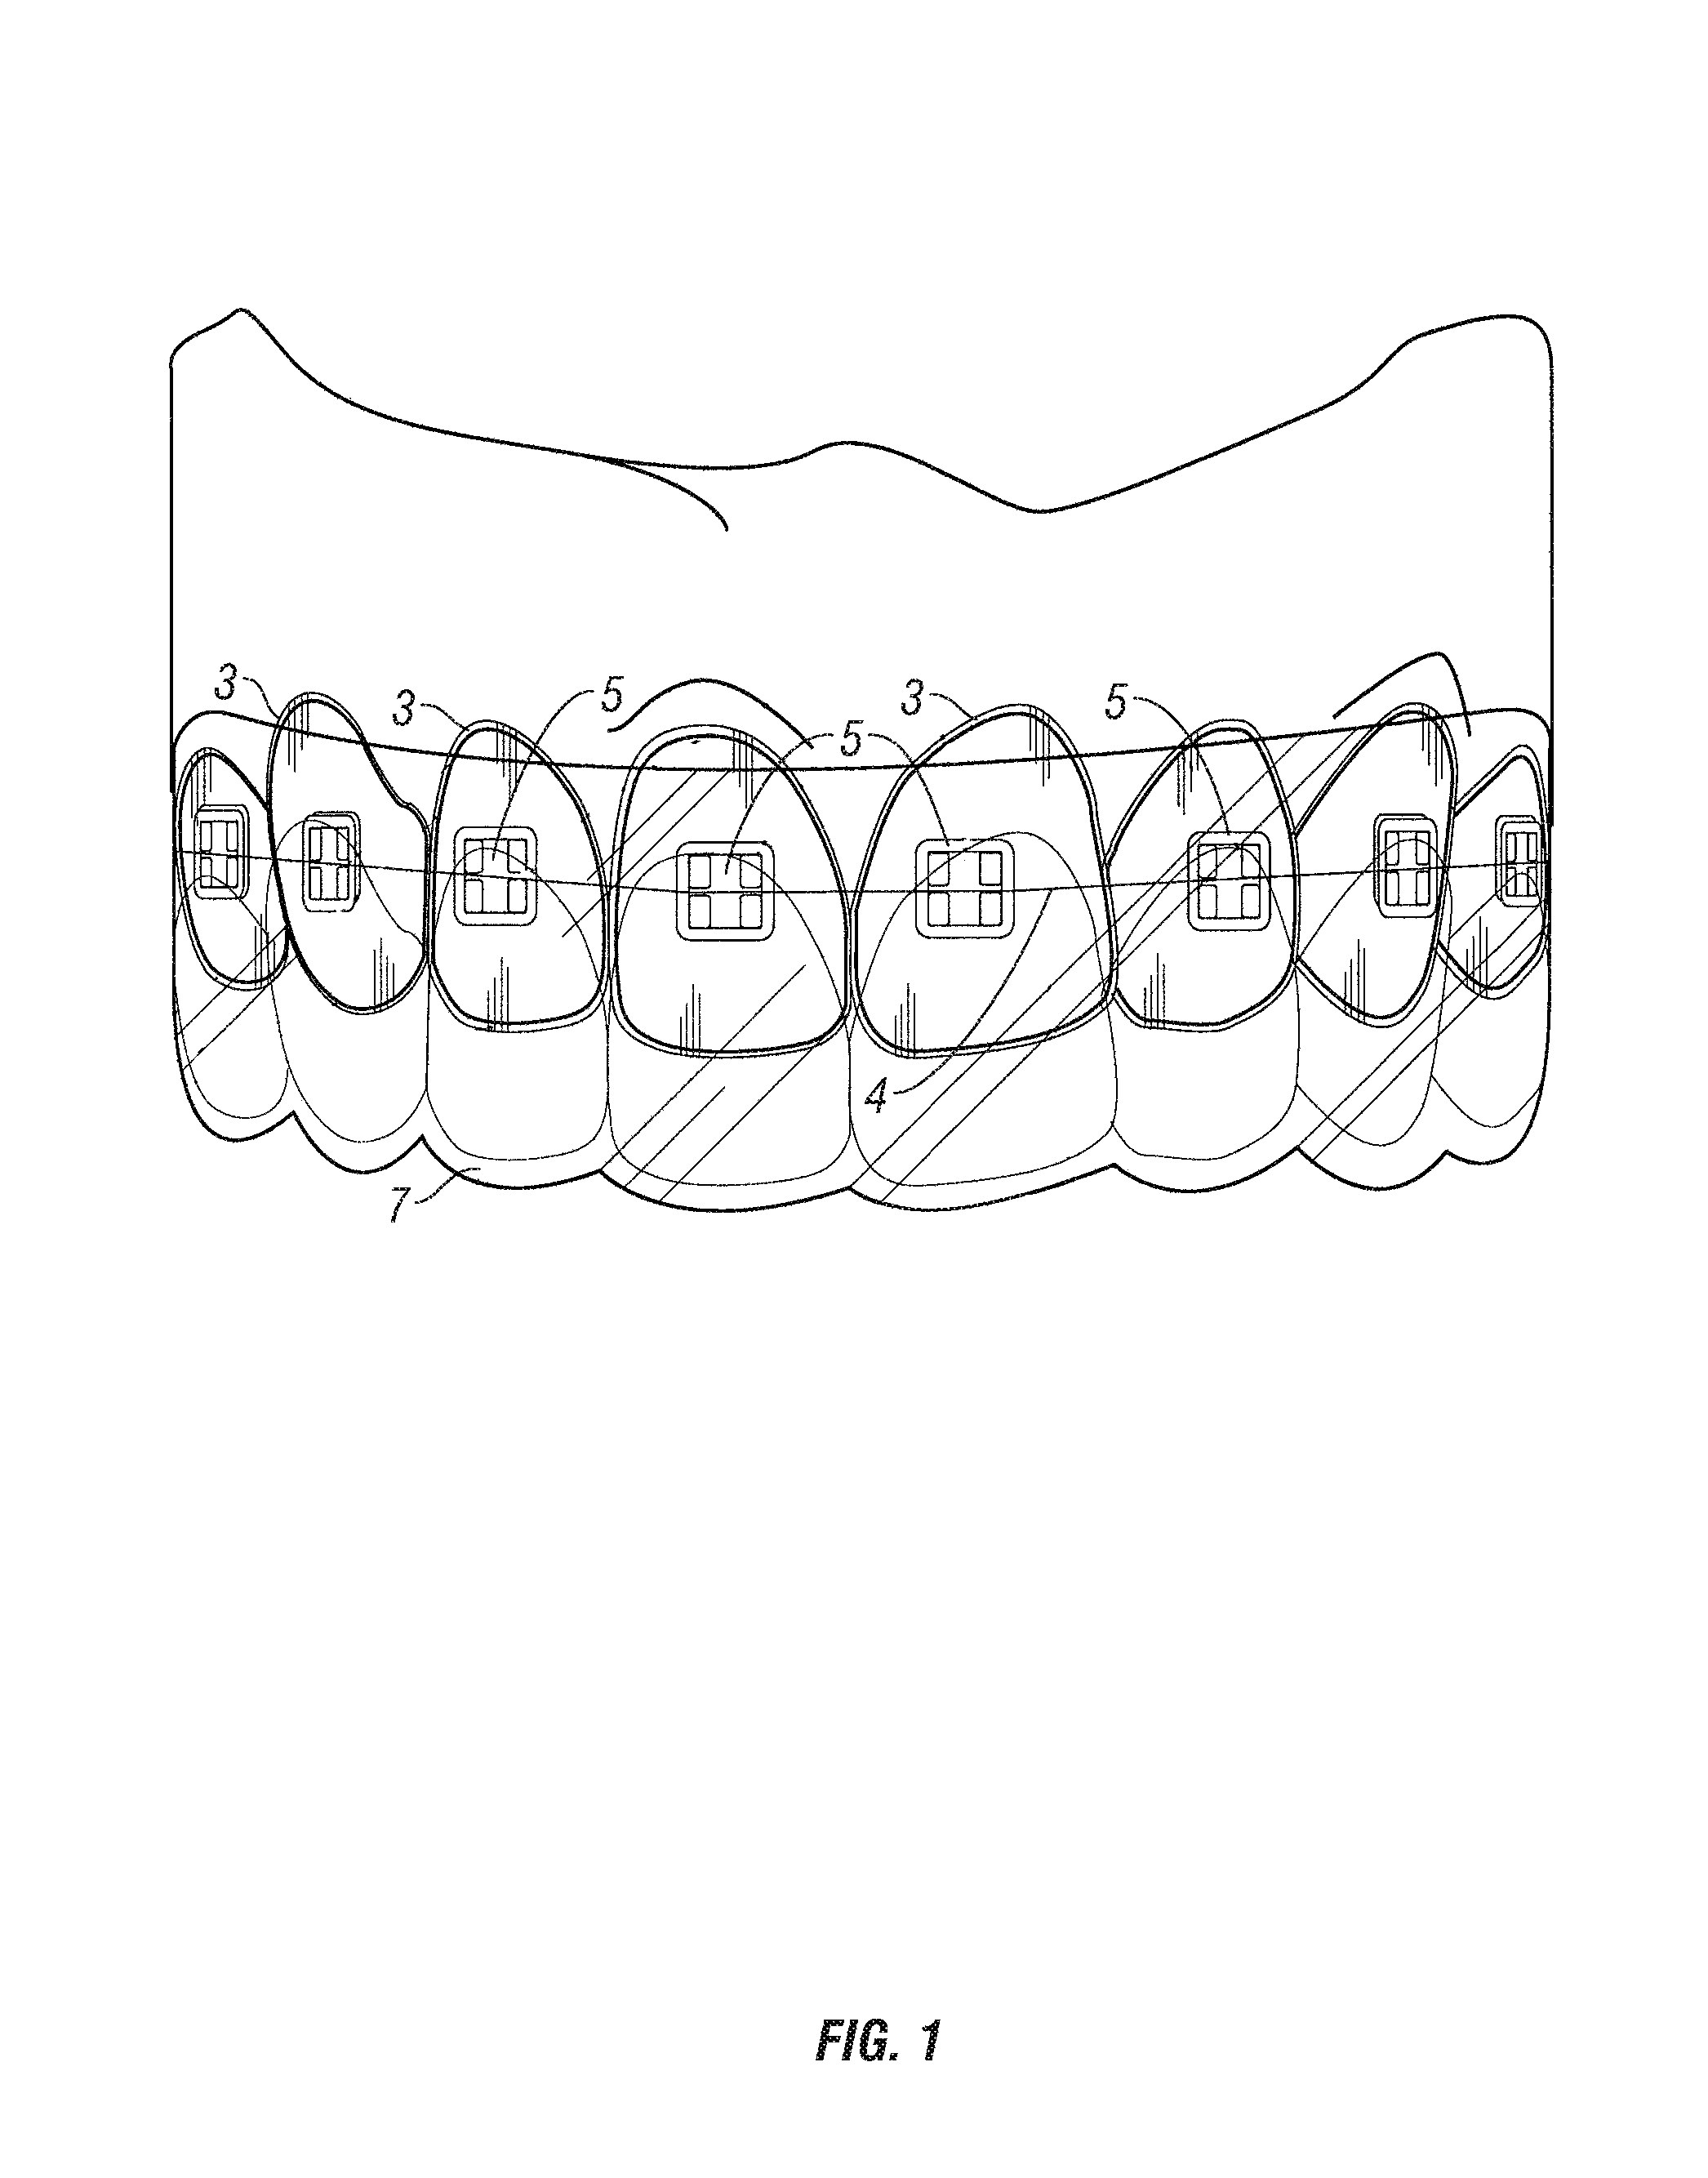 Orthodontic appliance system